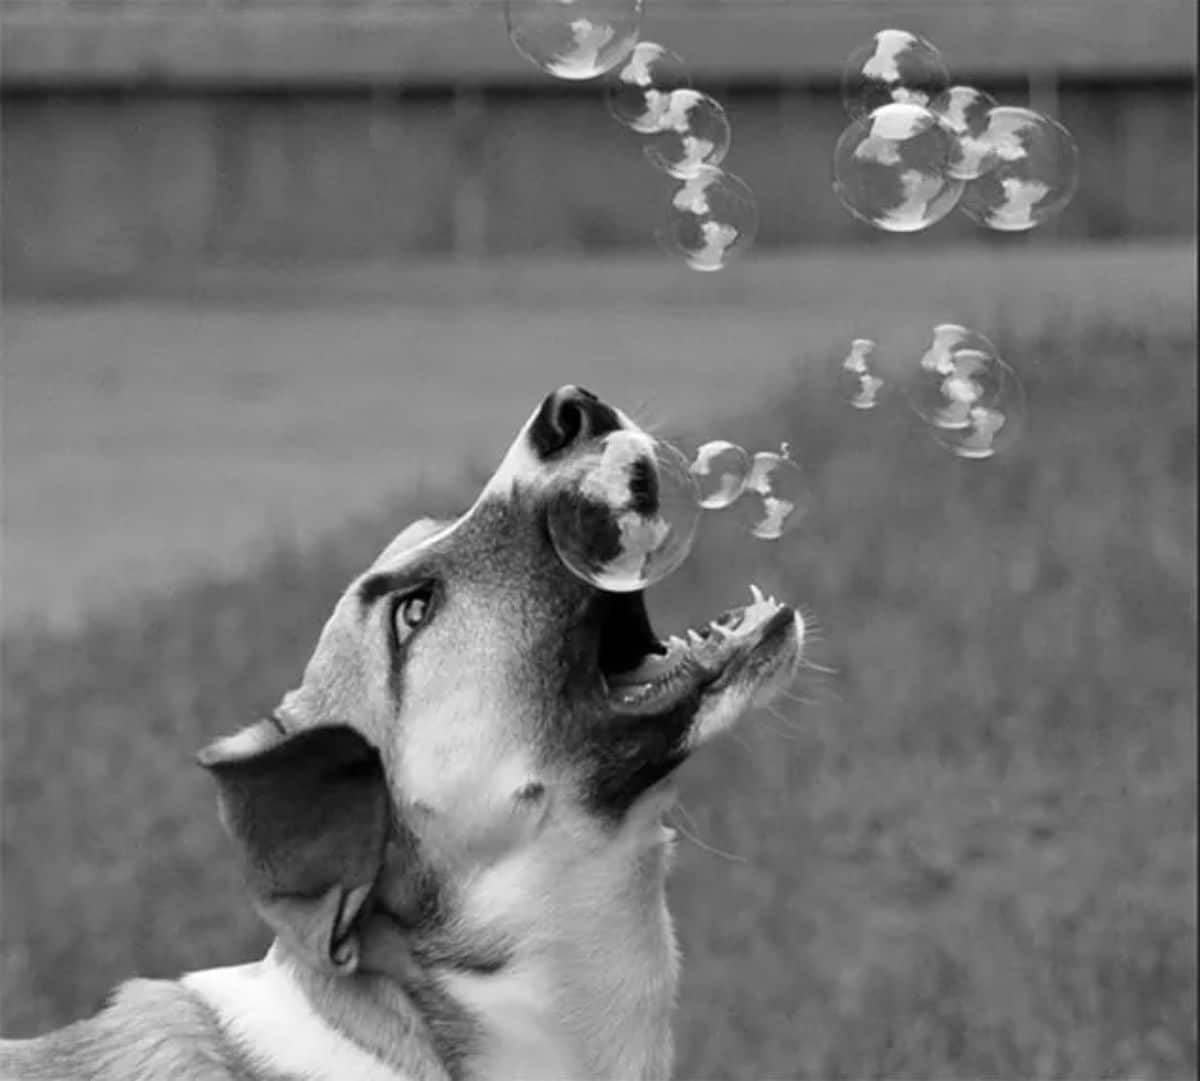 black and white photo of dog trying to catch soap bubbles in its mouth